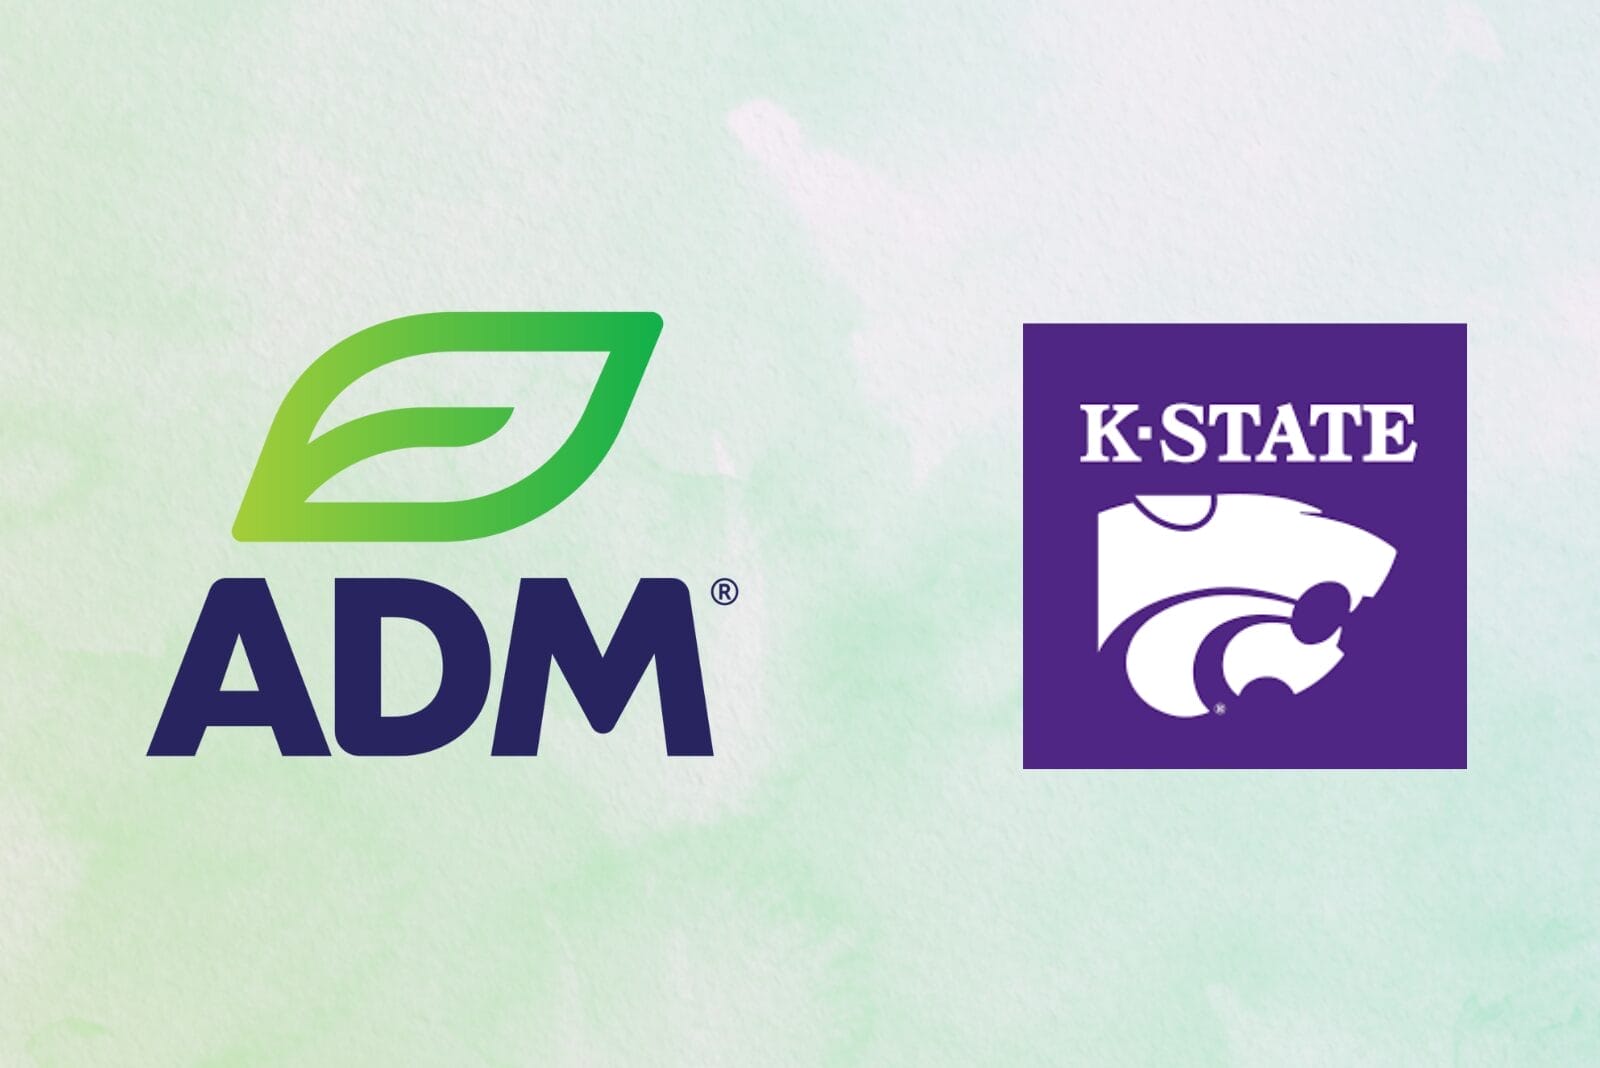 ADM and K-State logos on a gradient background.